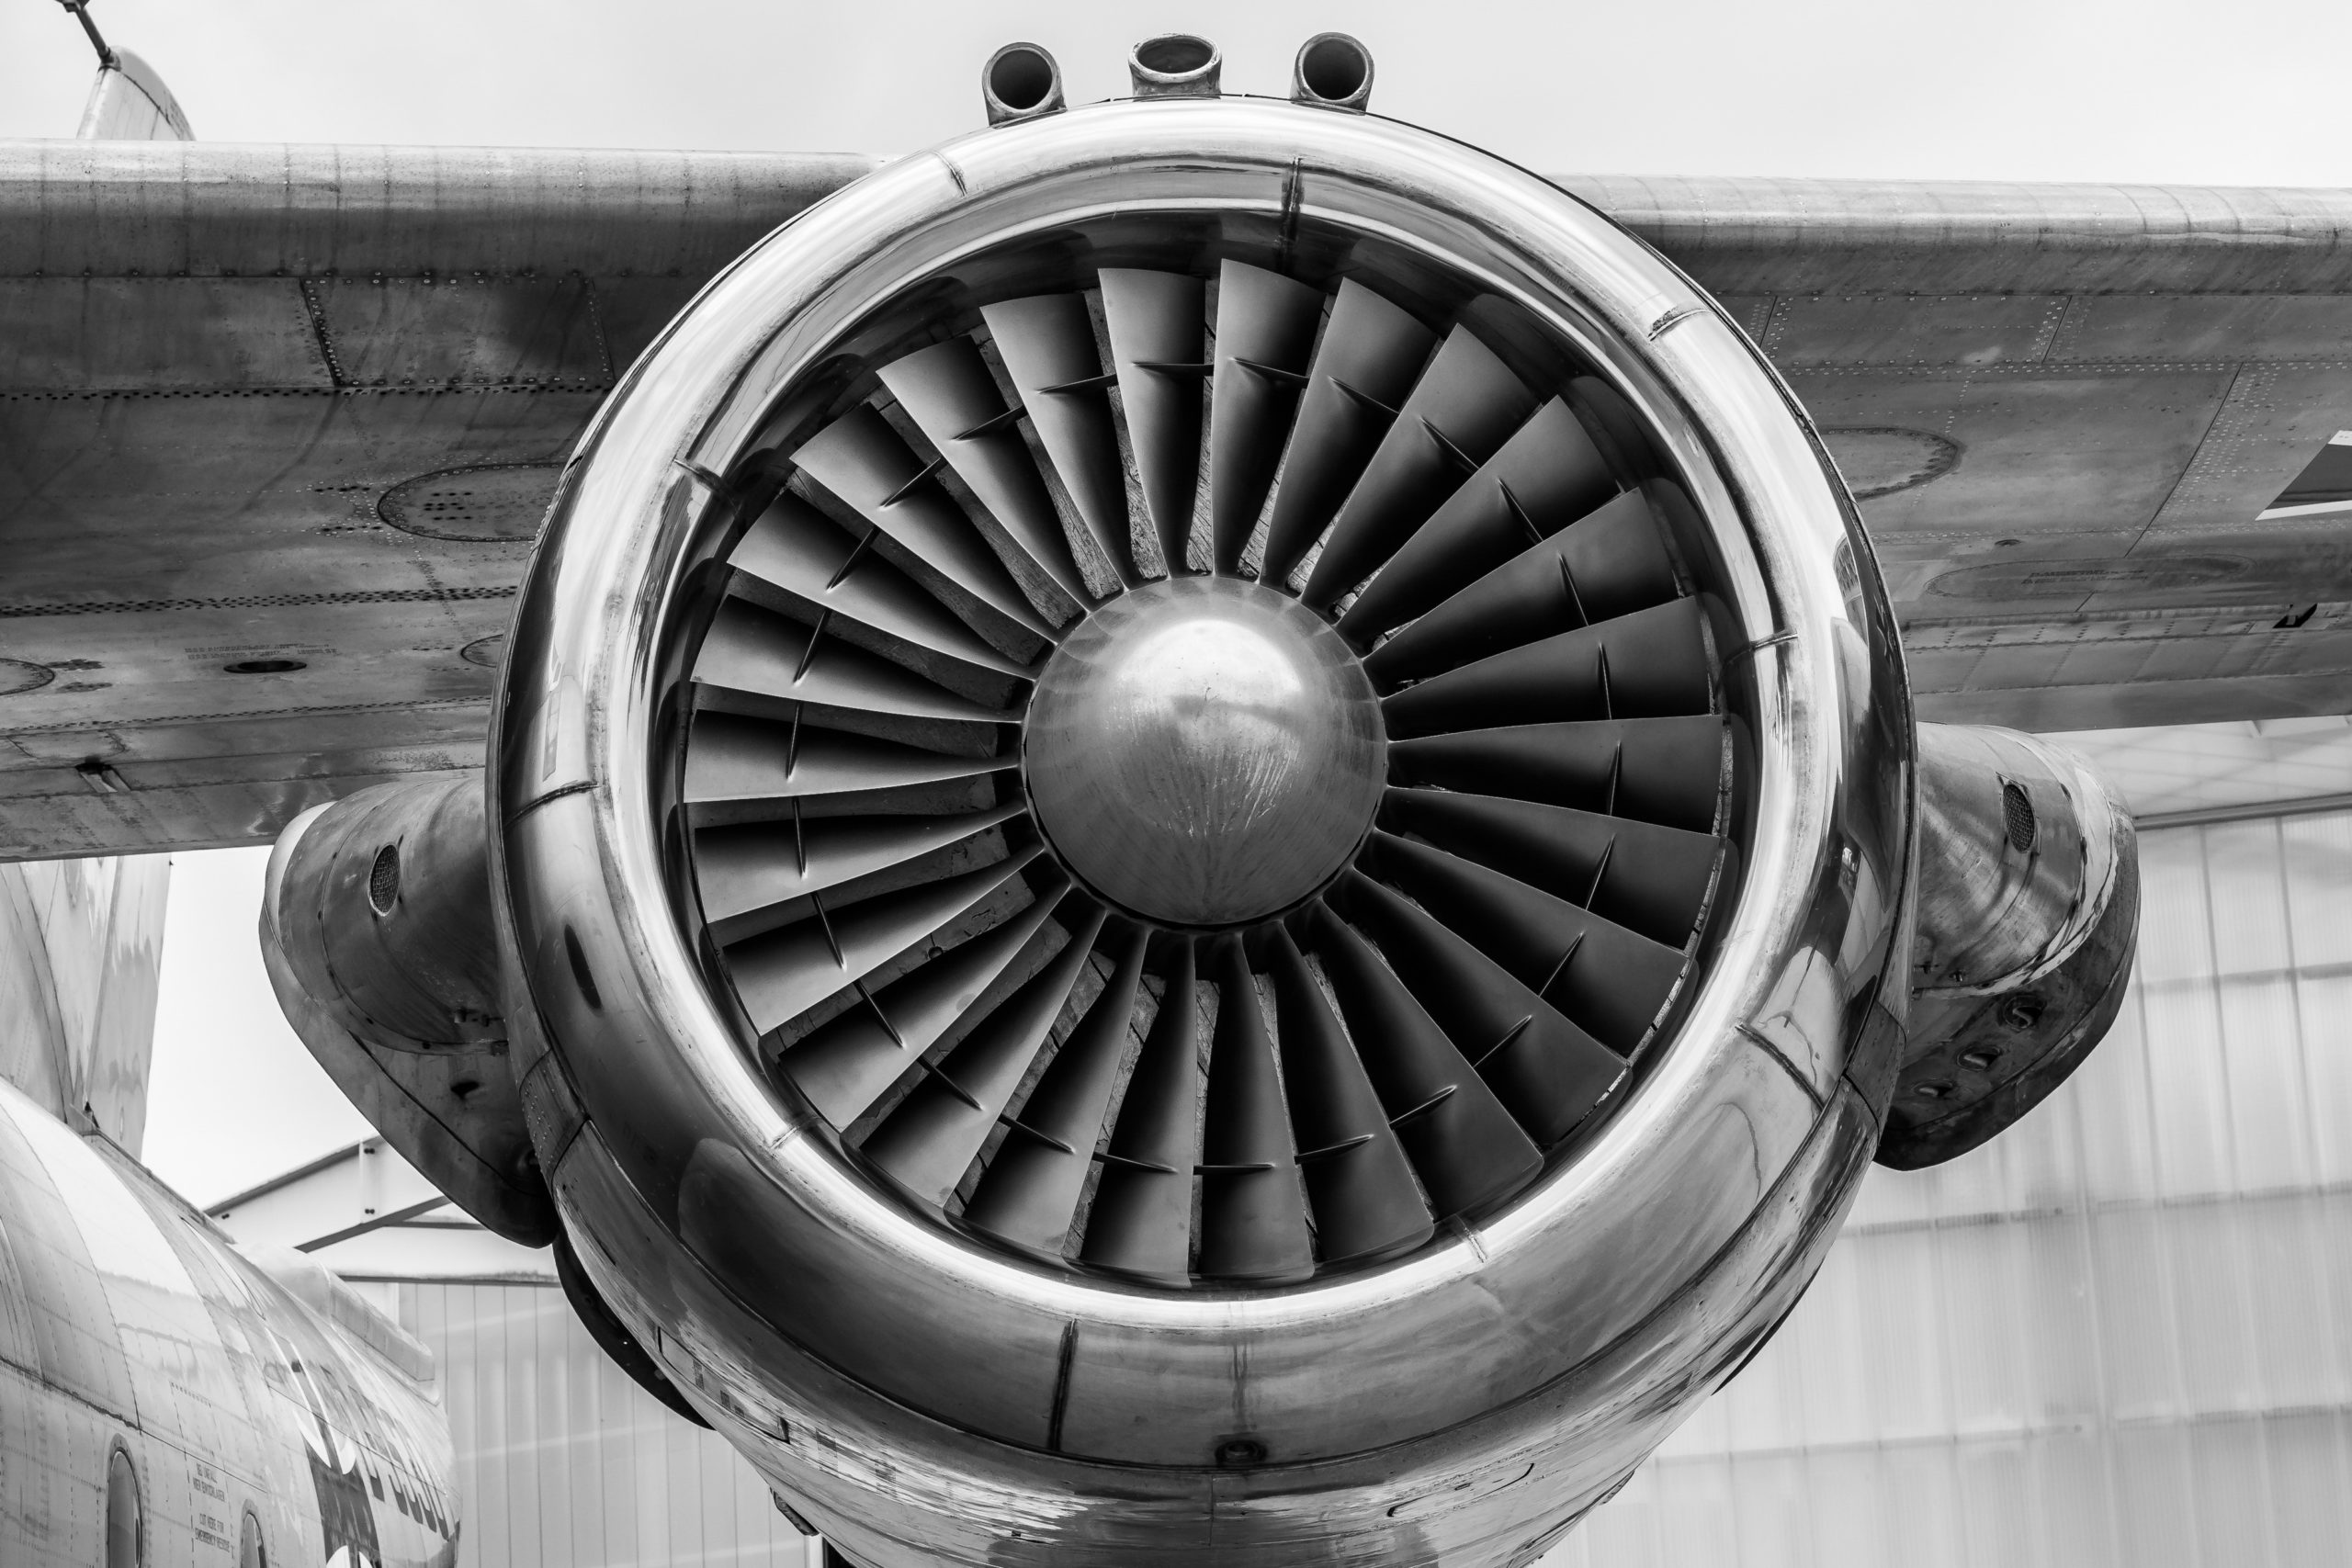 "Airplane Engine" by Pixabay from Pexels